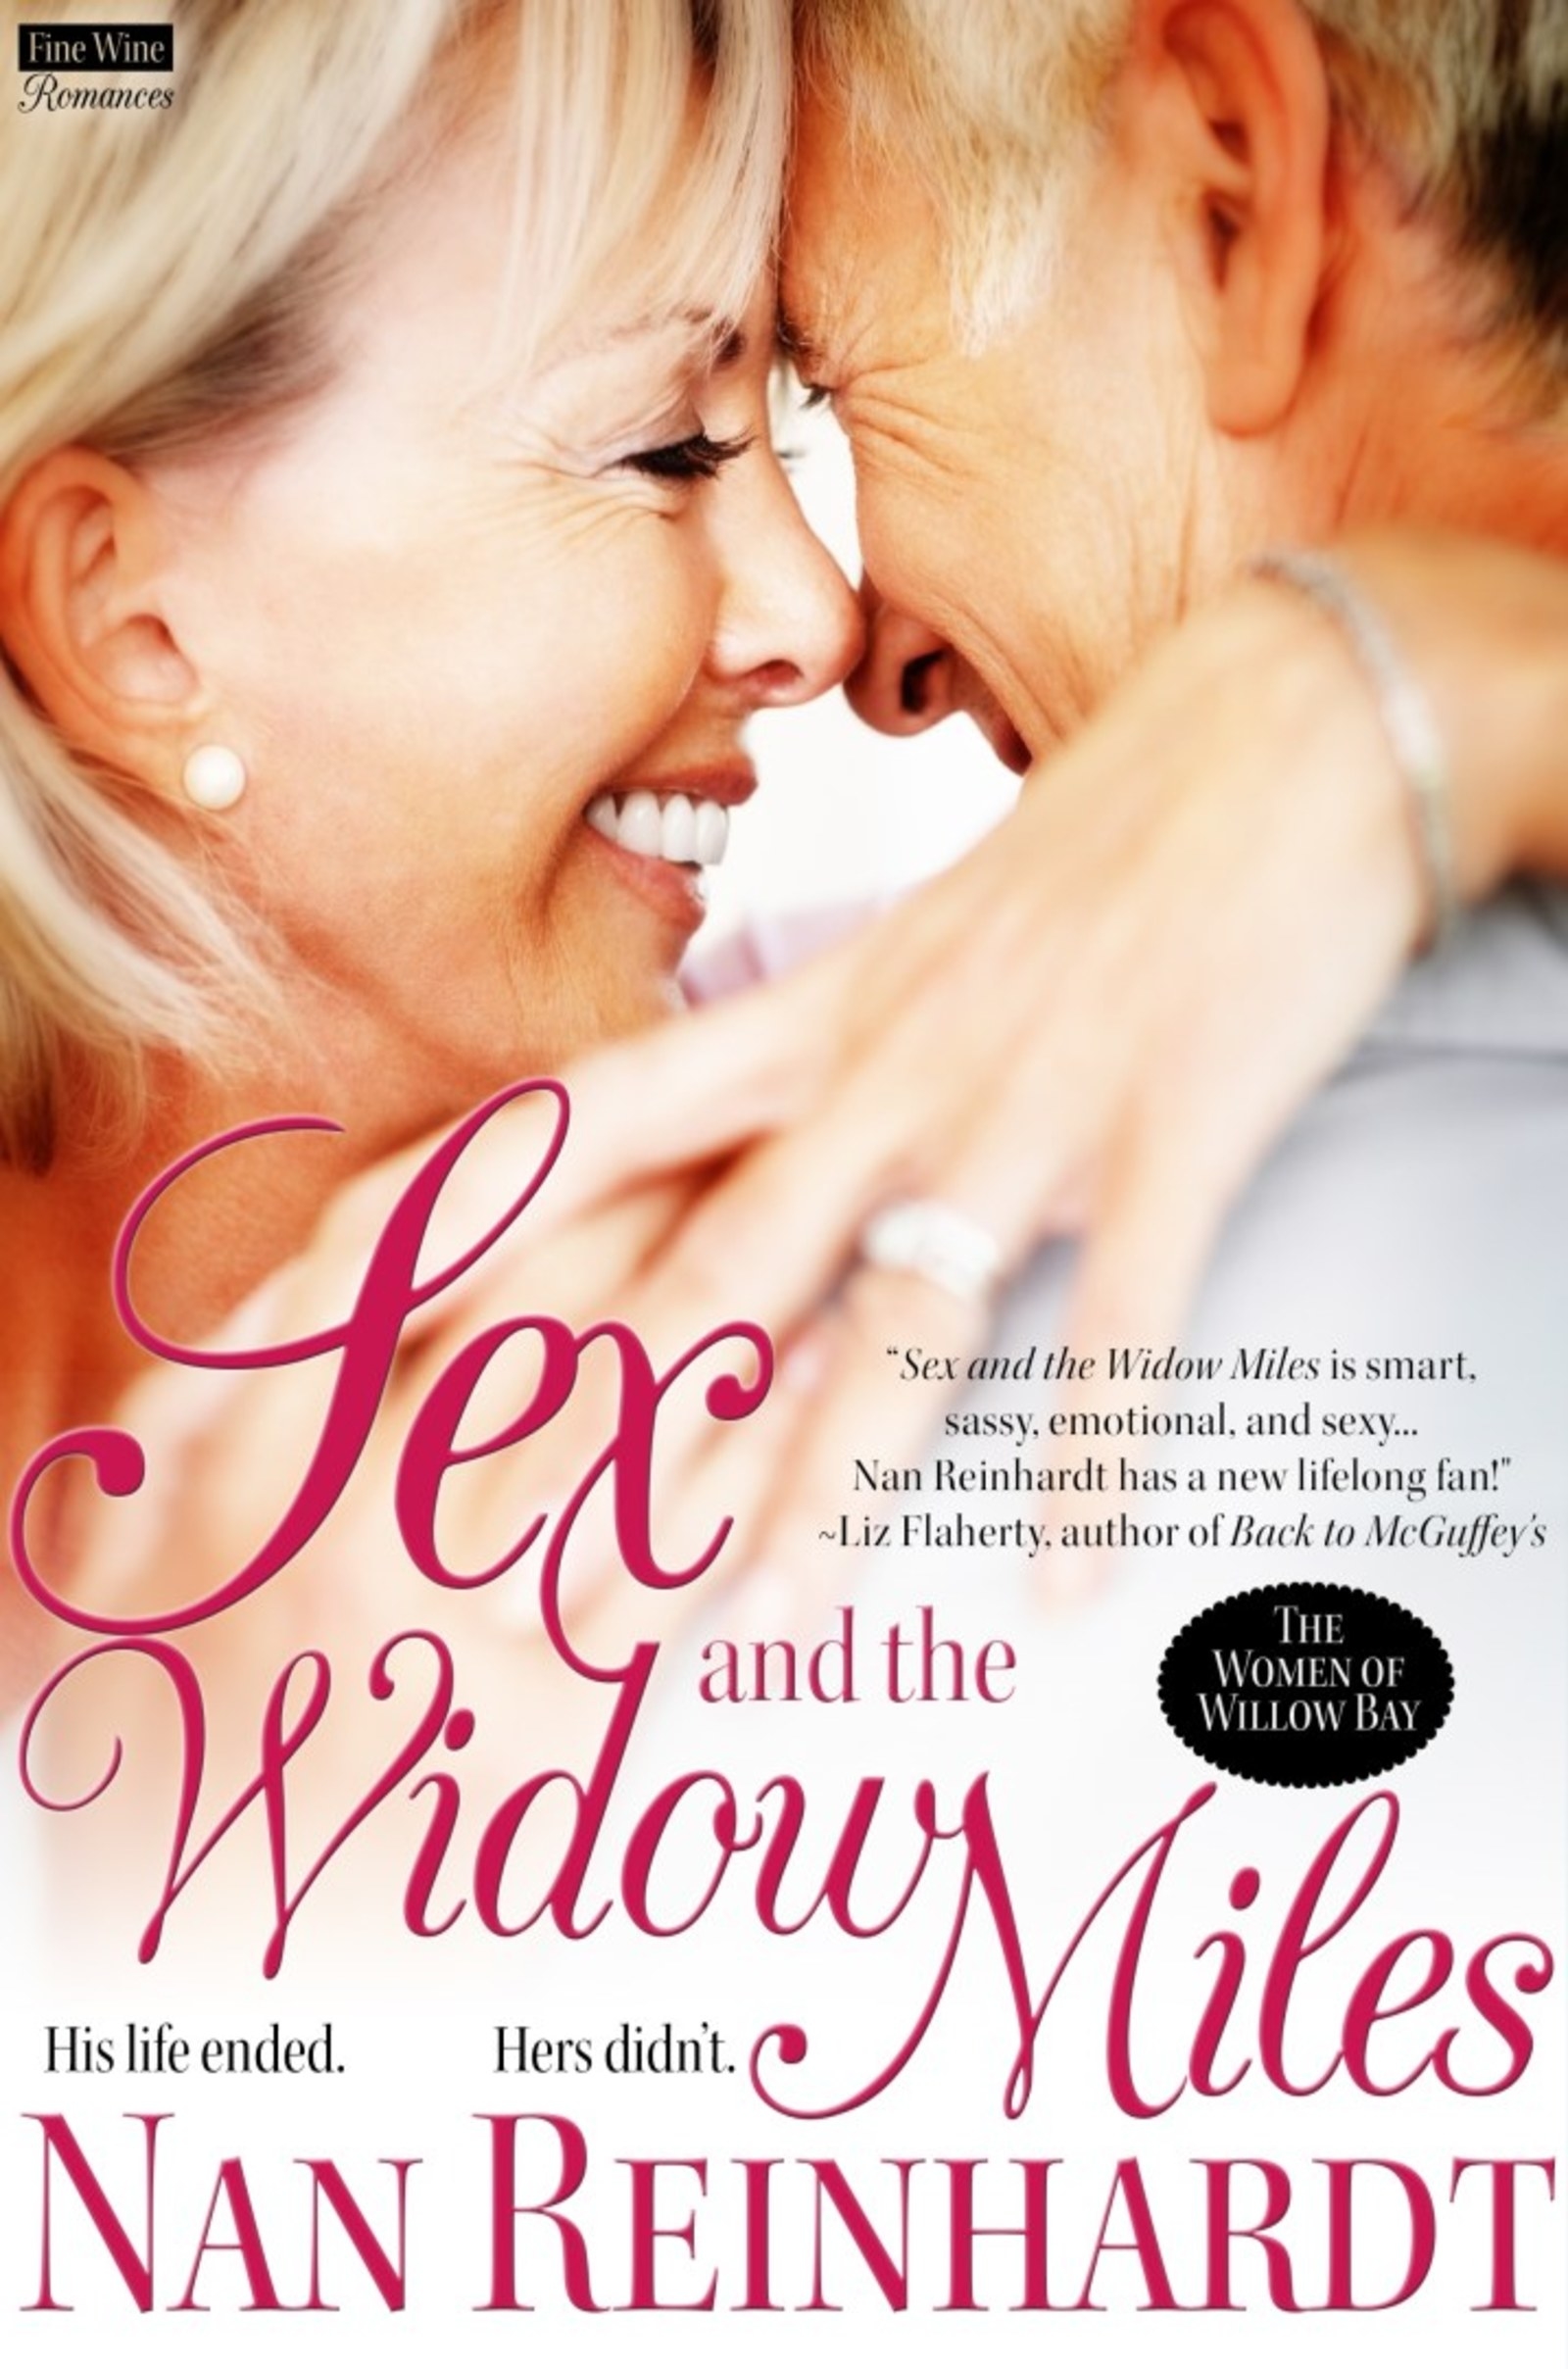 Book Cover of Sex And The Widow Miles by Nan Reinhardt